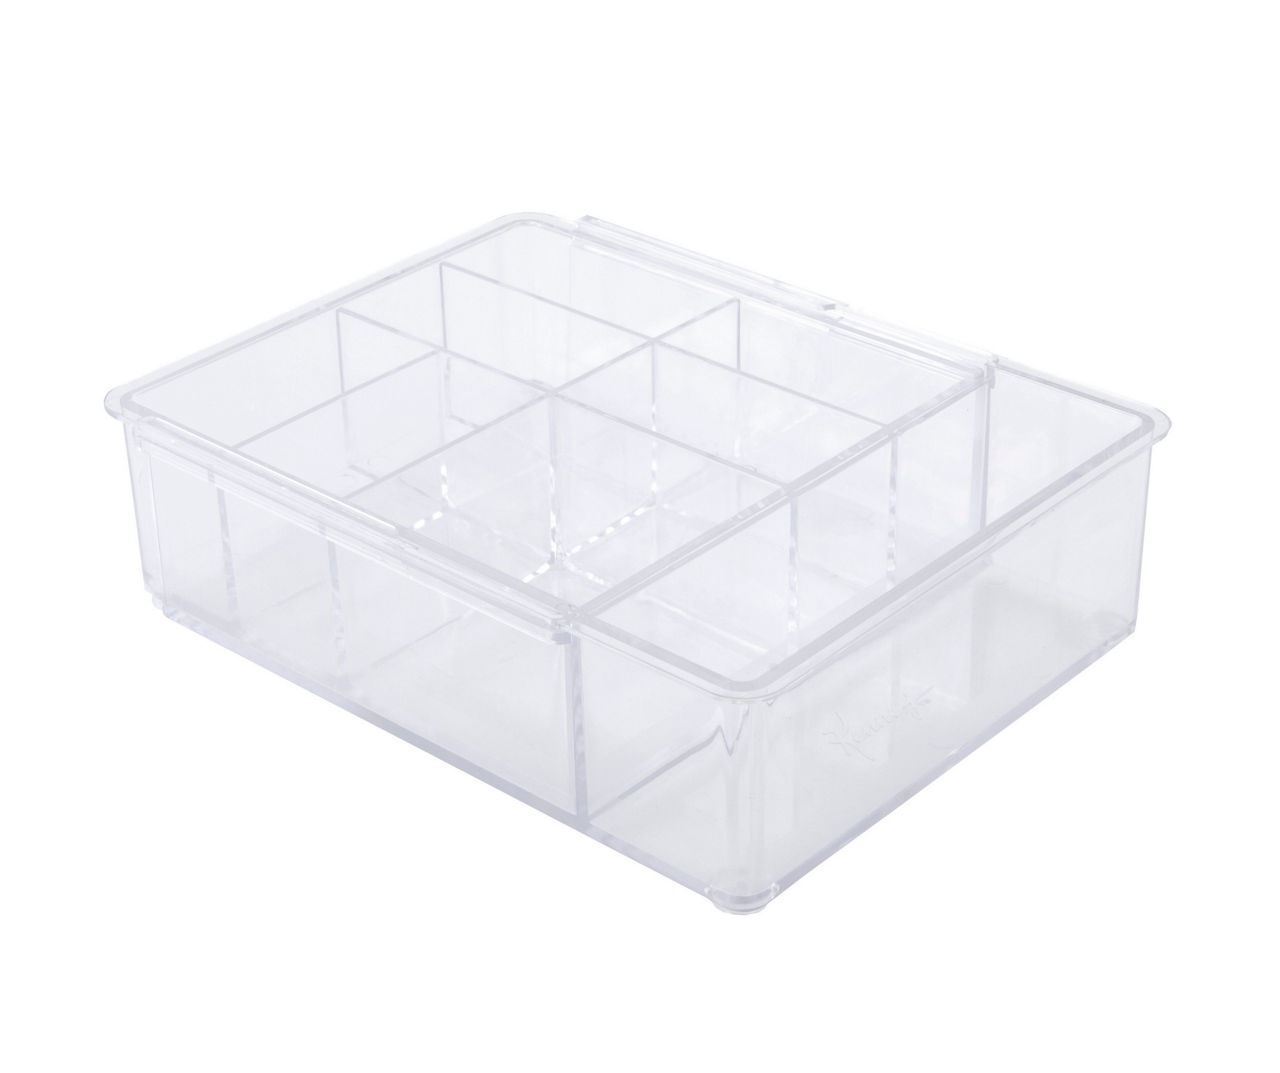 Kenney Storage Made Simple Expandable Drawer Organizer Tray, 8 Compartments  in Clear (Set of 2) KN68051V1P2REM - The Home Depot